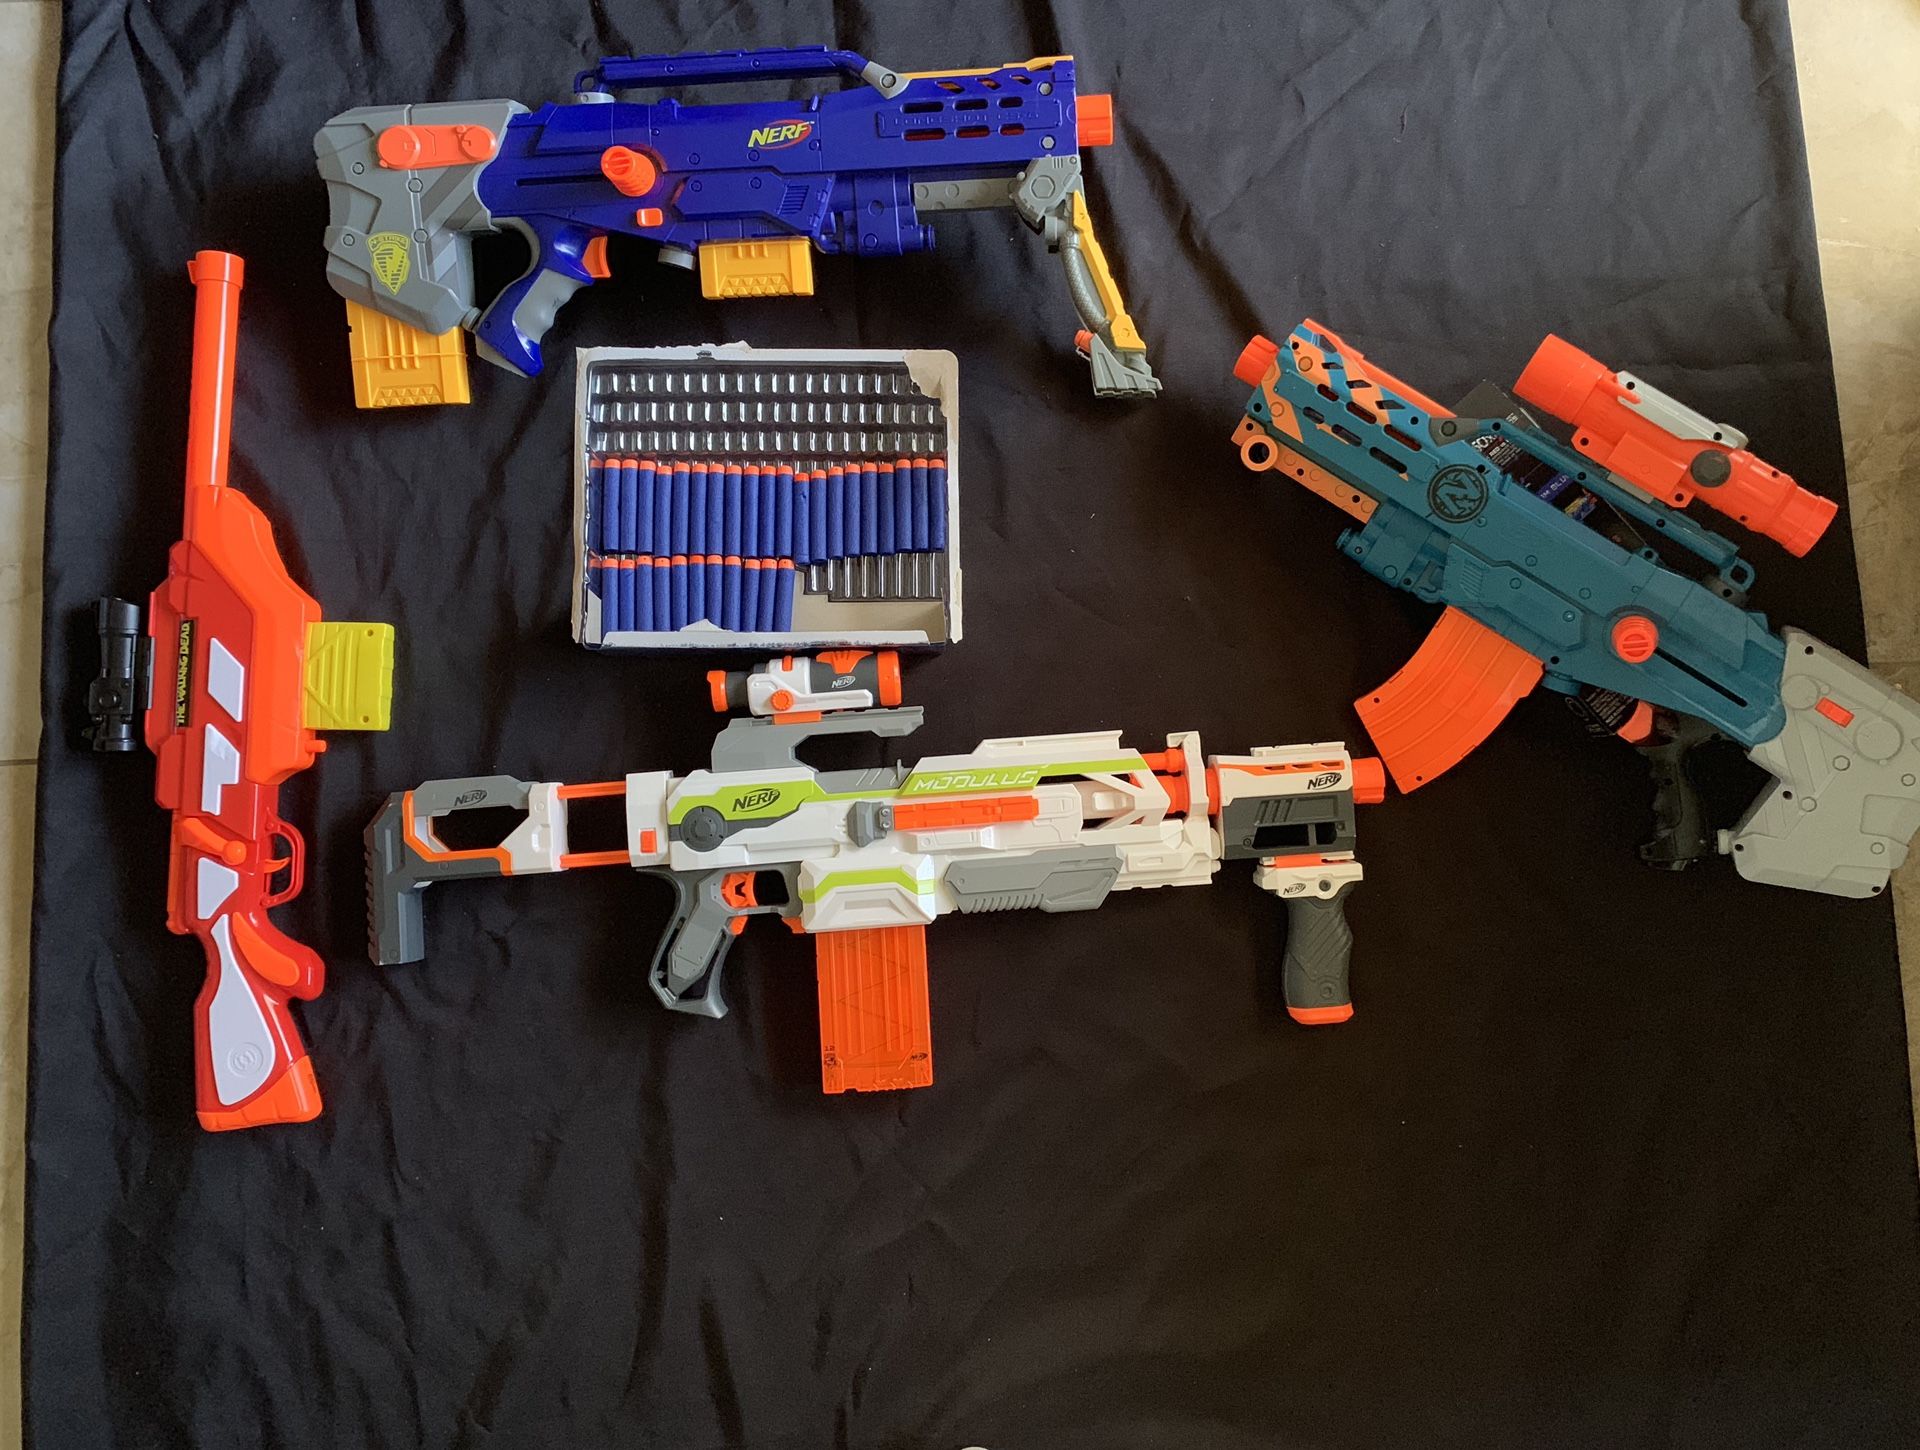 ****BUNDLE OF NERF GUNS - COMPLETE SET OF 10 and Accessories!!*****